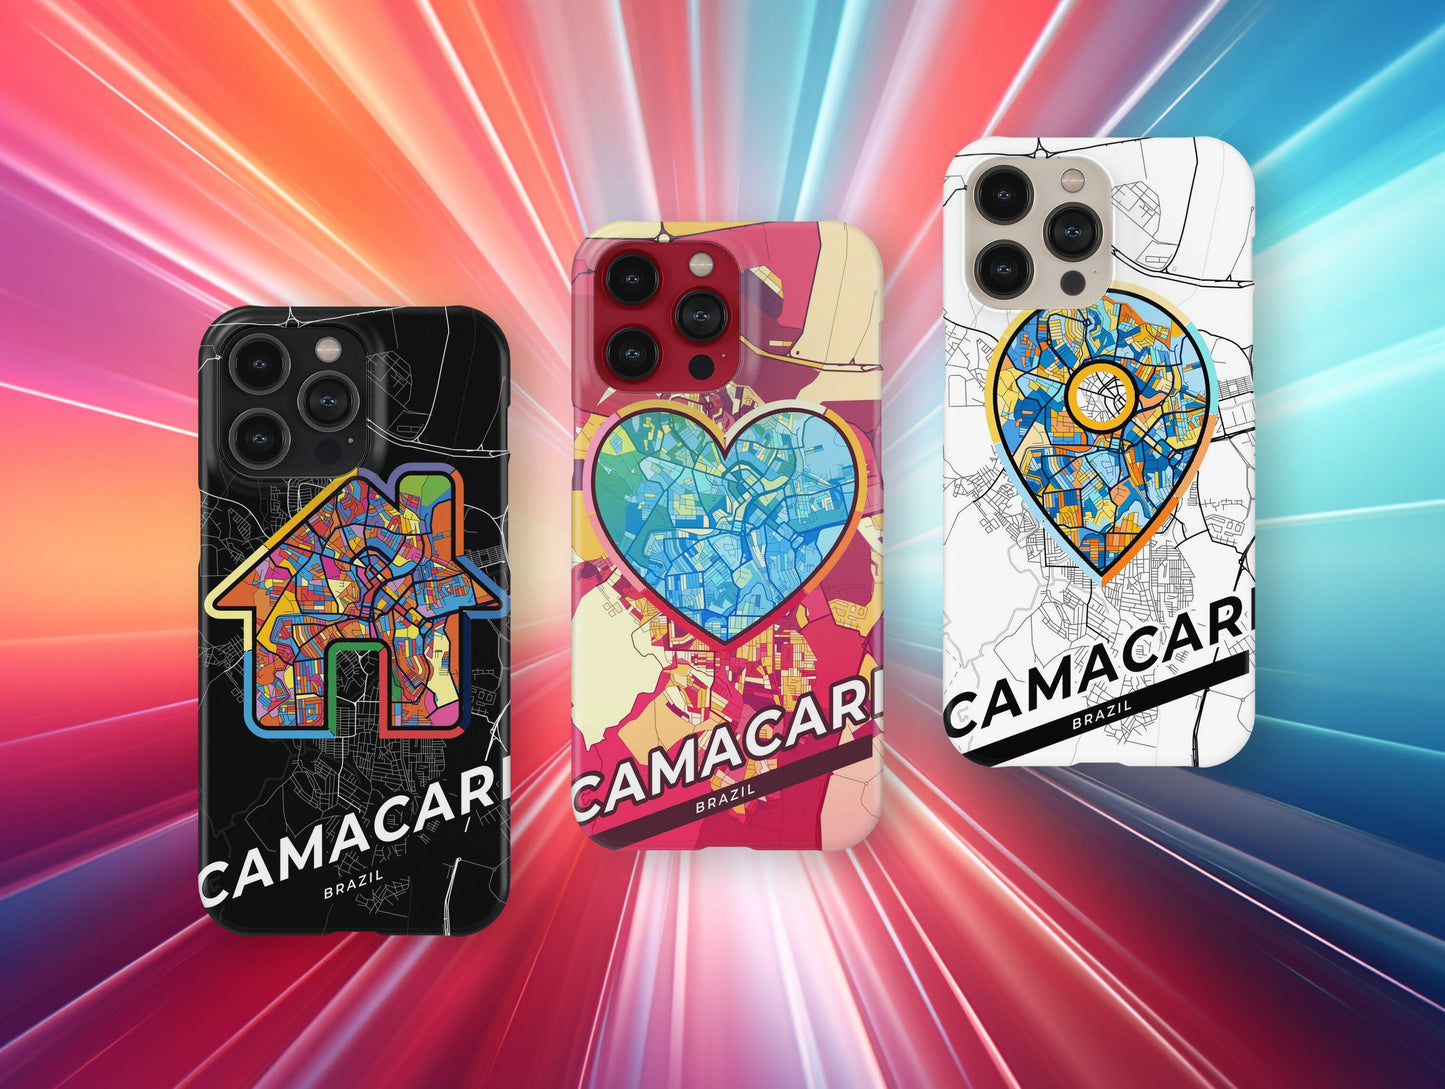 Camacari Brazil slim phone case with colorful icon. Birthday, wedding or housewarming gift. Couple match cases.